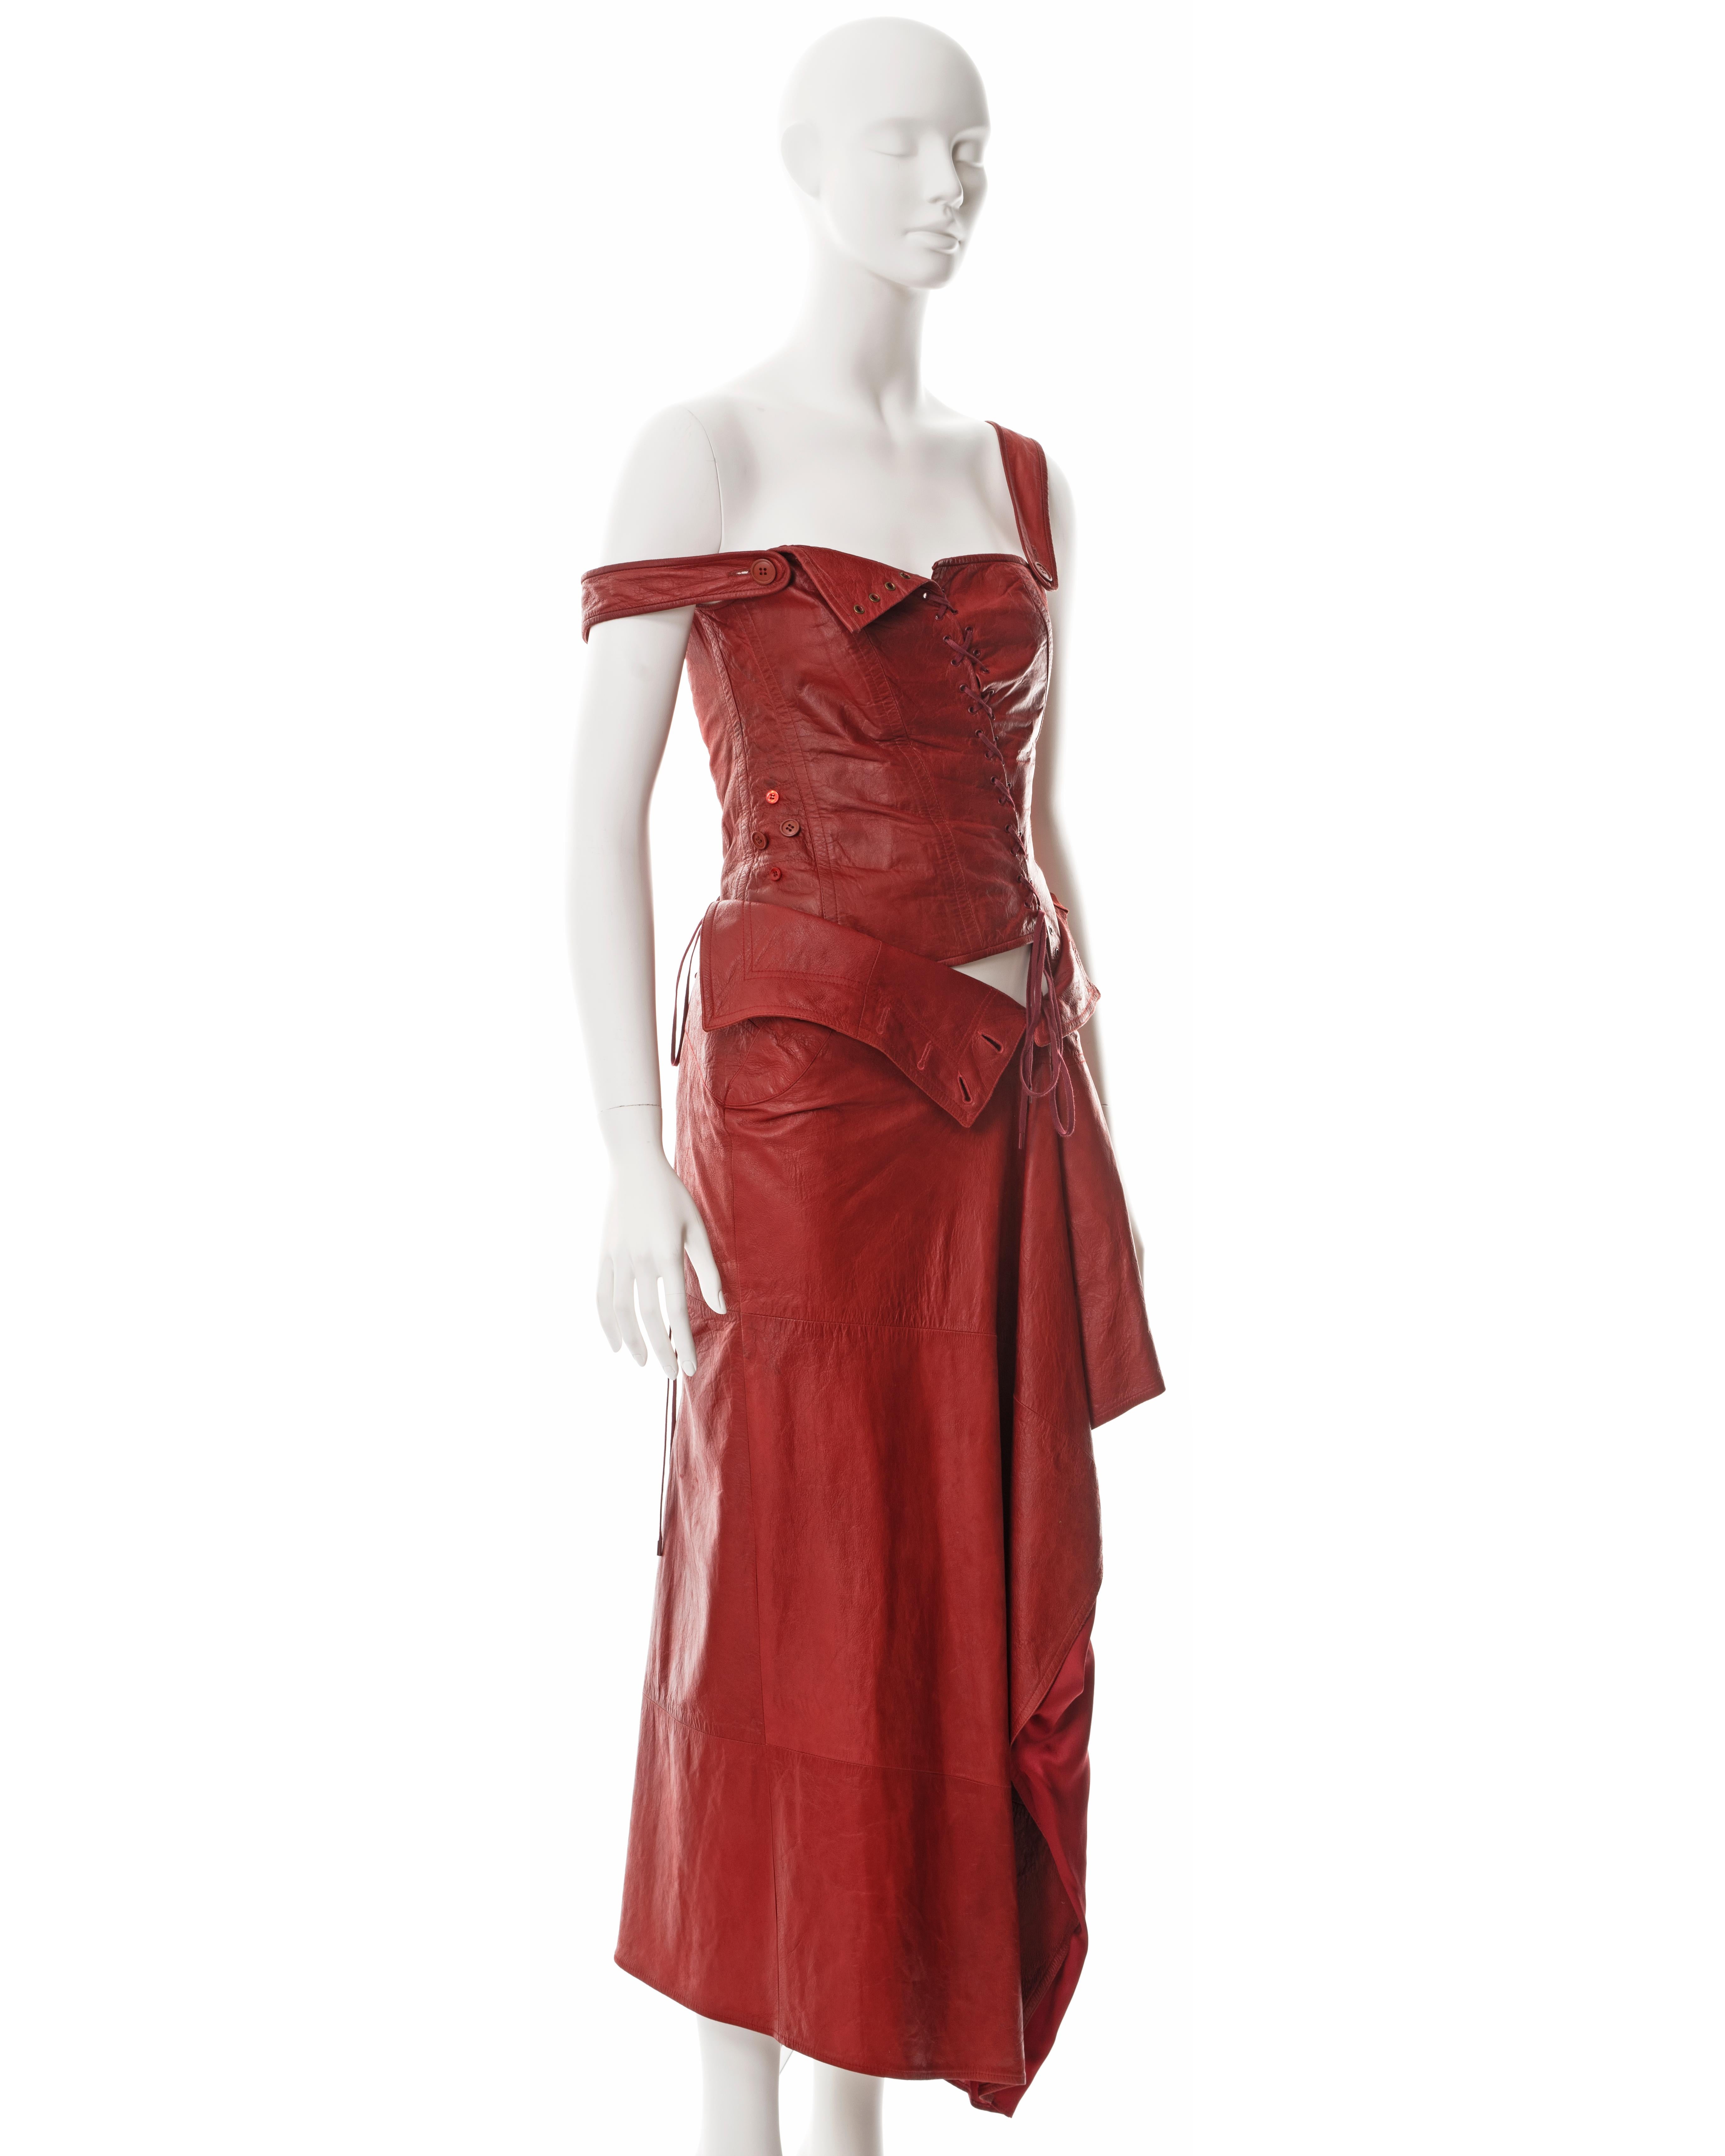 Christian Dior by John Galliano red lambskin leather corset and skirt, ss 2000 11